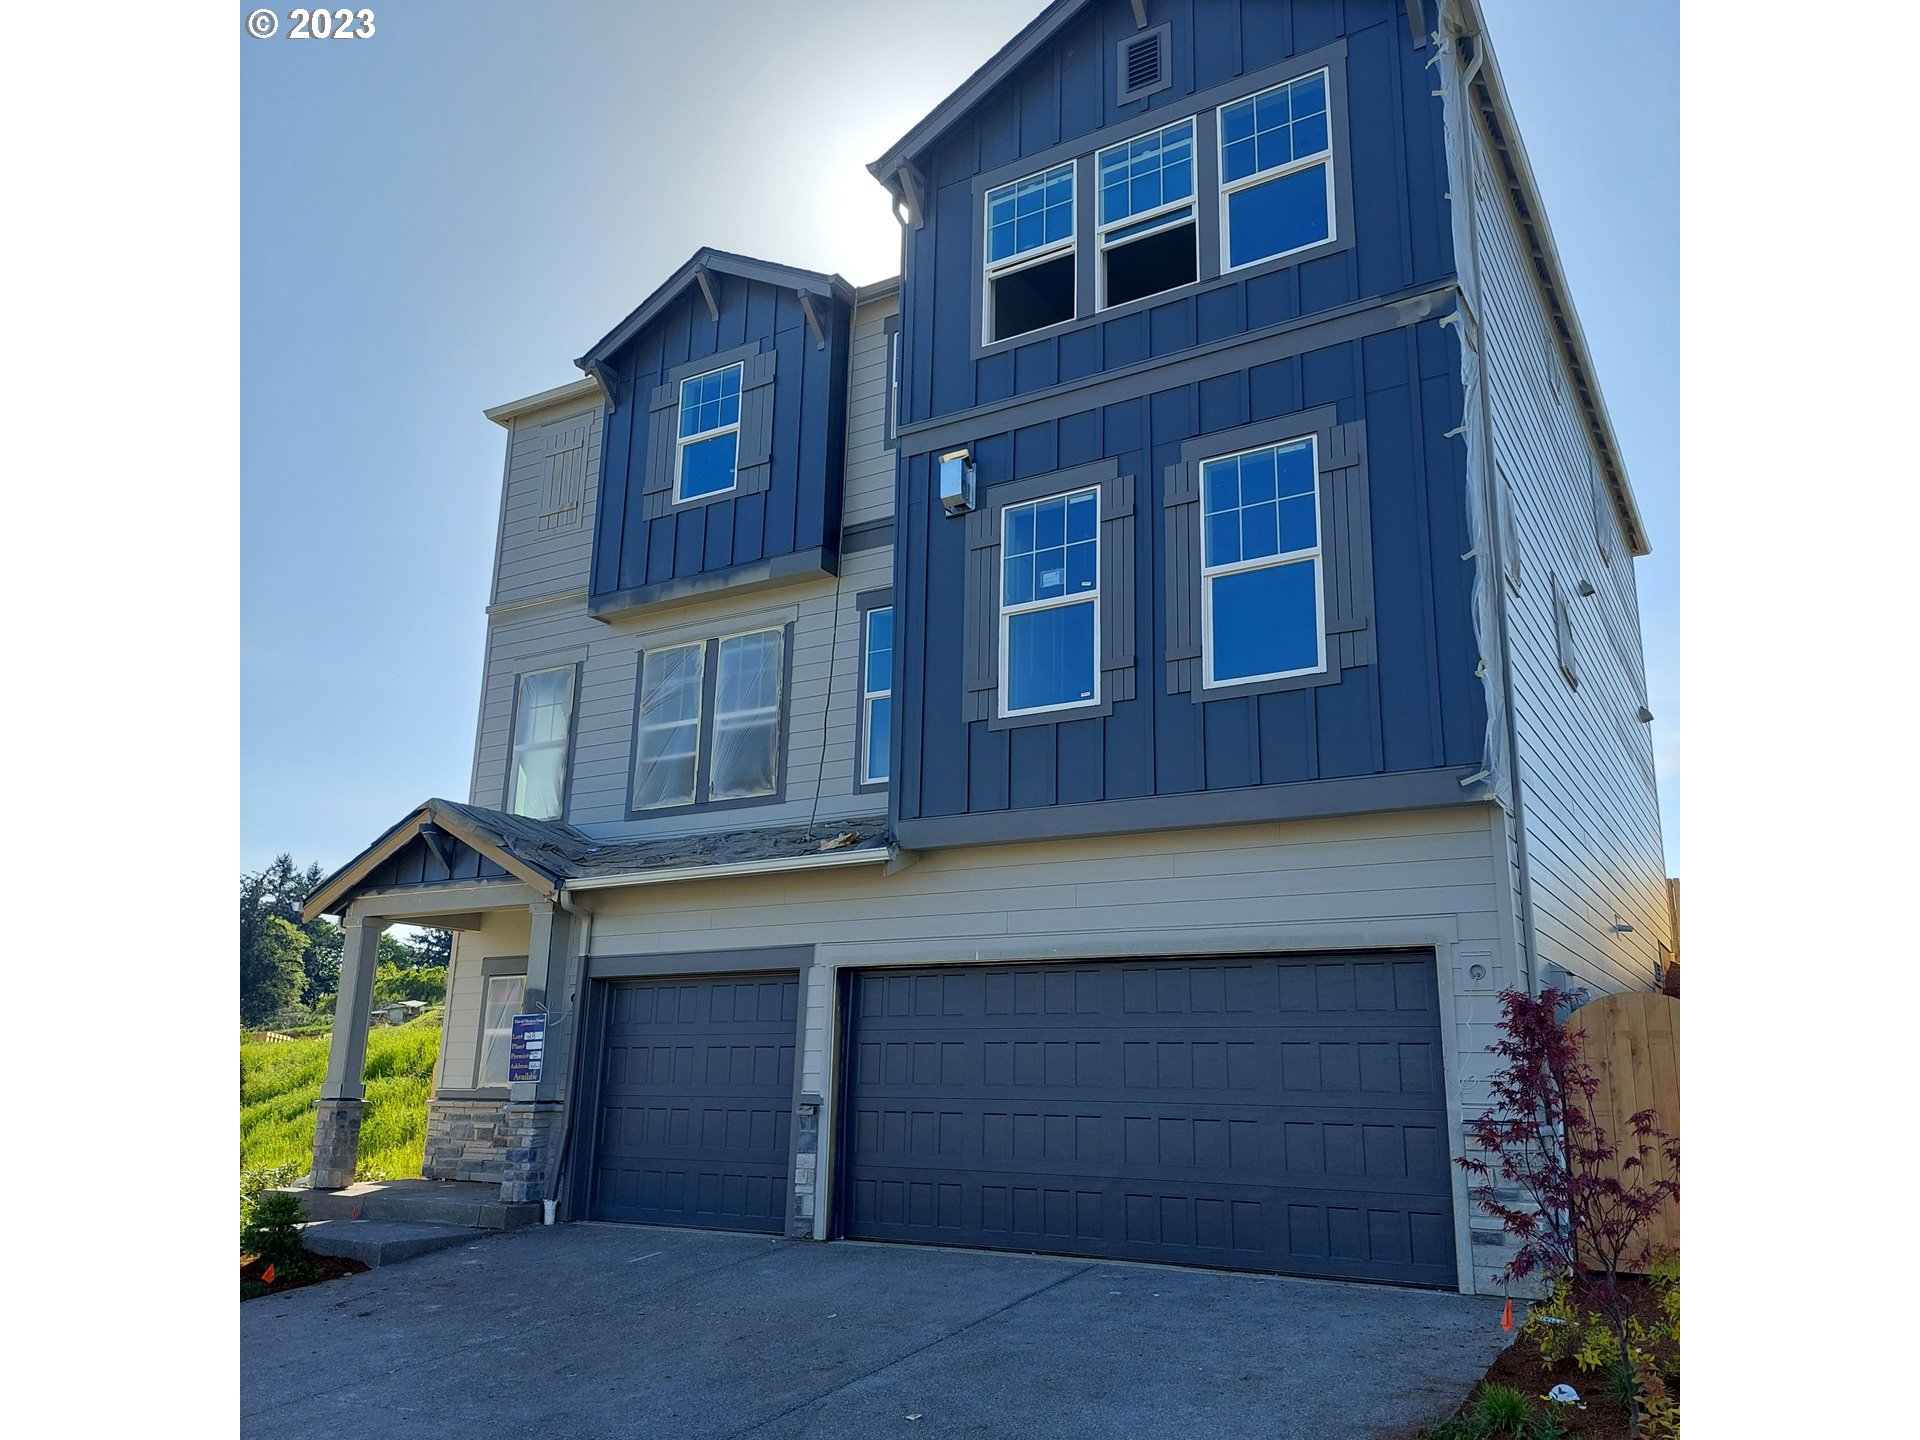 Brand new construction home with June completion! Builder Incentive-12K towards closing costs through Builder Preferred Lender!! ***Model Home Open WEEKENDS at 12400 SW Strobel Rd 10AM-6PM*** The Pearce Plan has a three car Garage-4 Beds, 3 Full Baths, Retreat and Study. Quartz, Stainless apps, Engaging Customer Service Experience, Energy efficient homes by Earth Advantage, Mountainside-Beaverton School District.